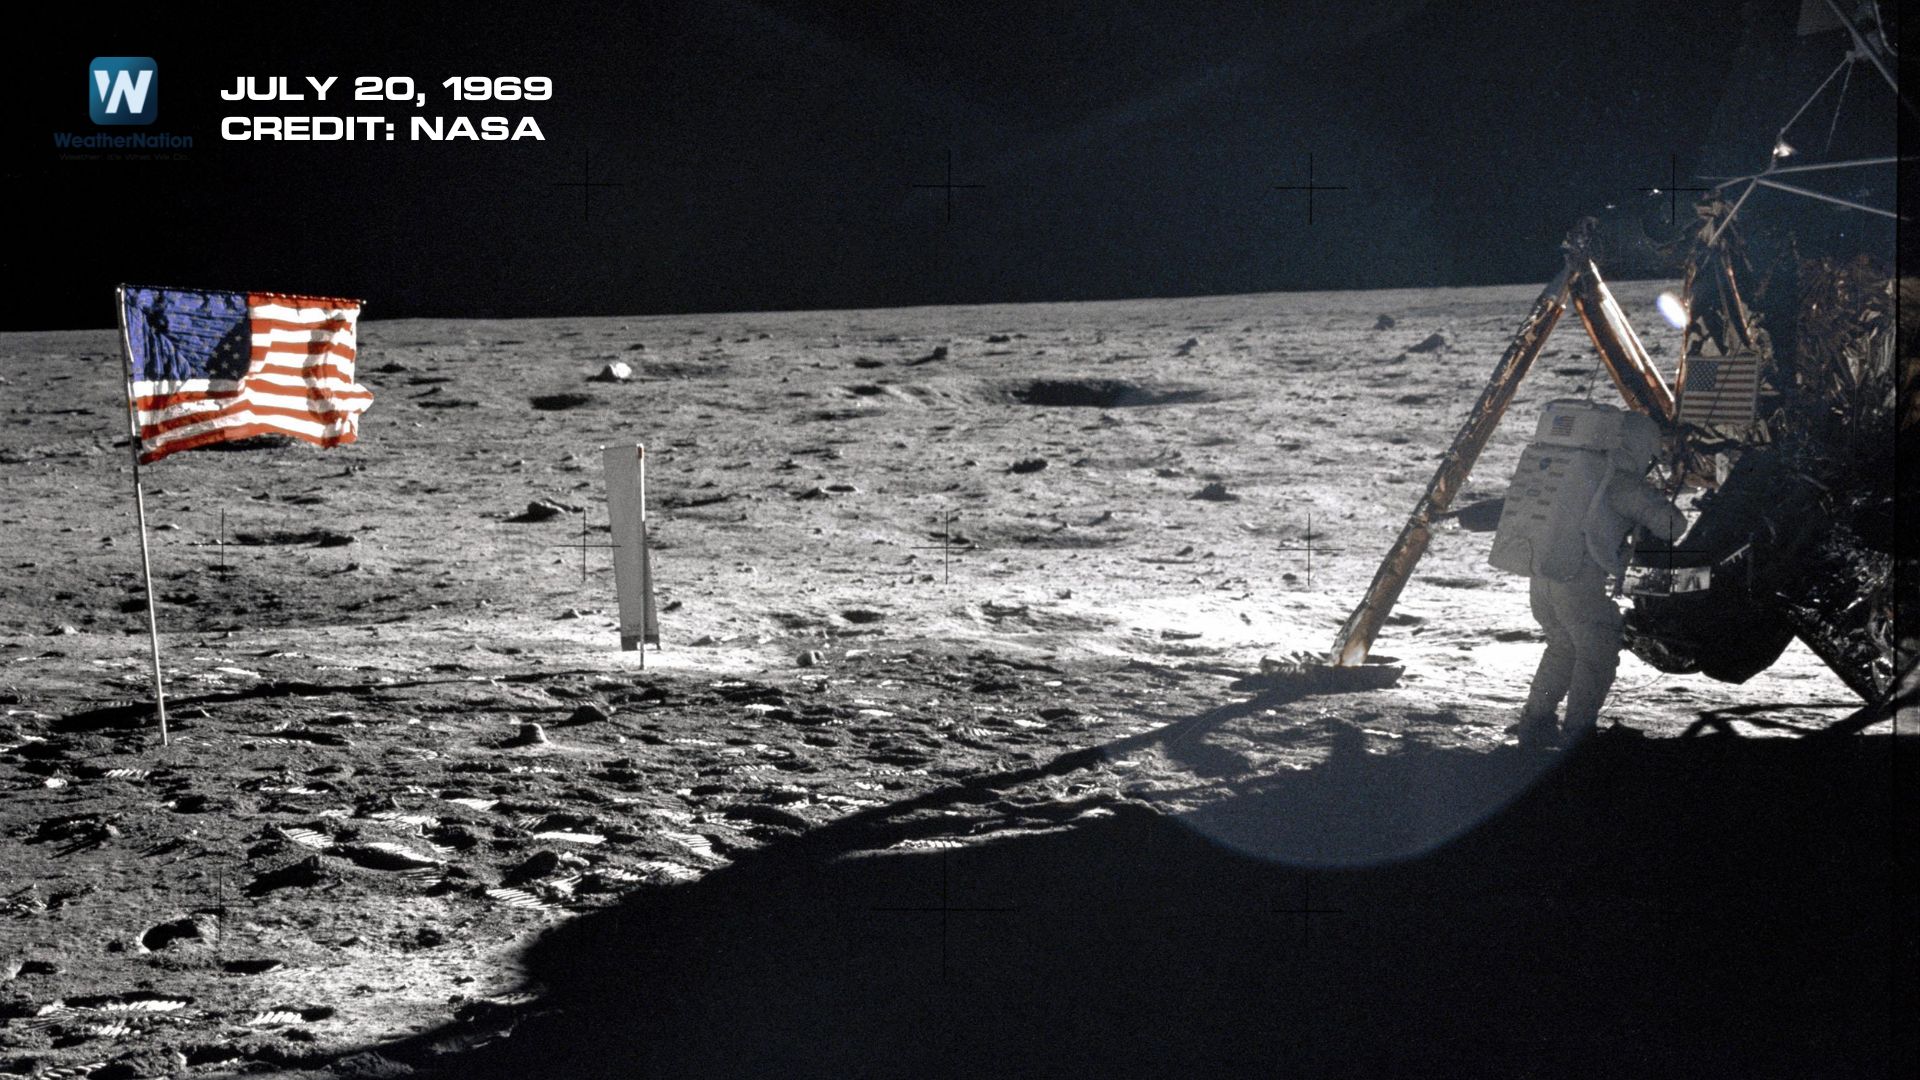 July 20, 1969 when humans stepped foot on the moon!